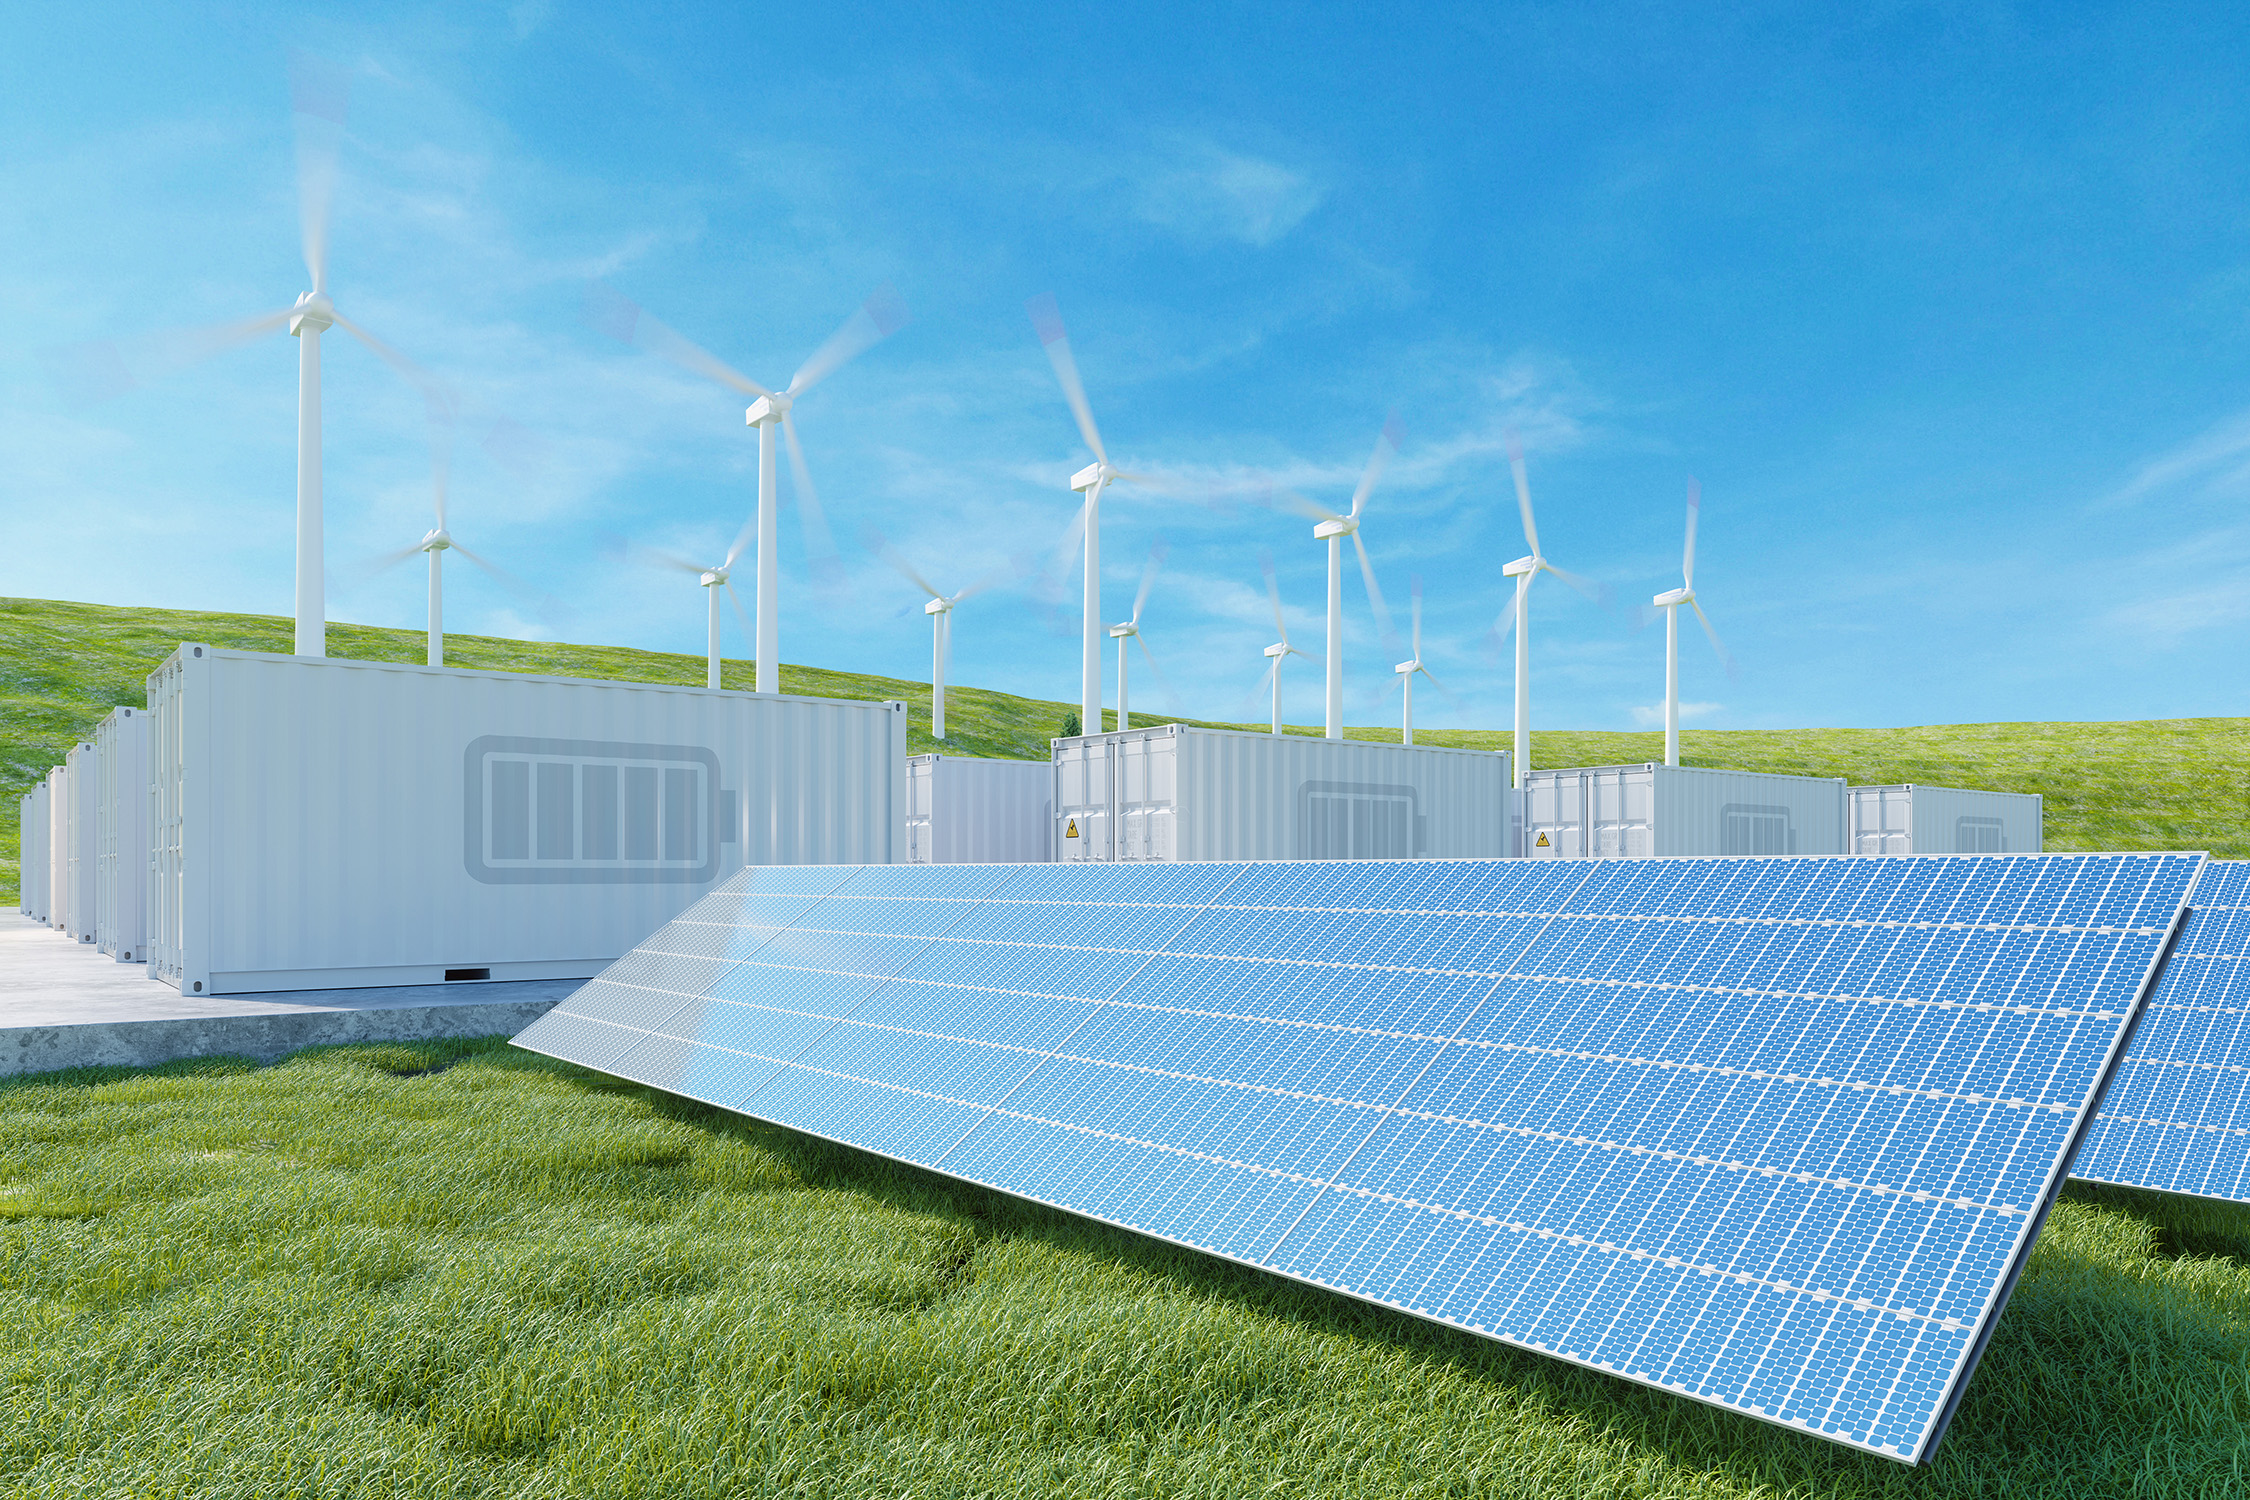 Energy storage solutions are supporting the increased adoption of renewable power by helping balance fluctuating electricity demands with the intermittent nature of some green sources.